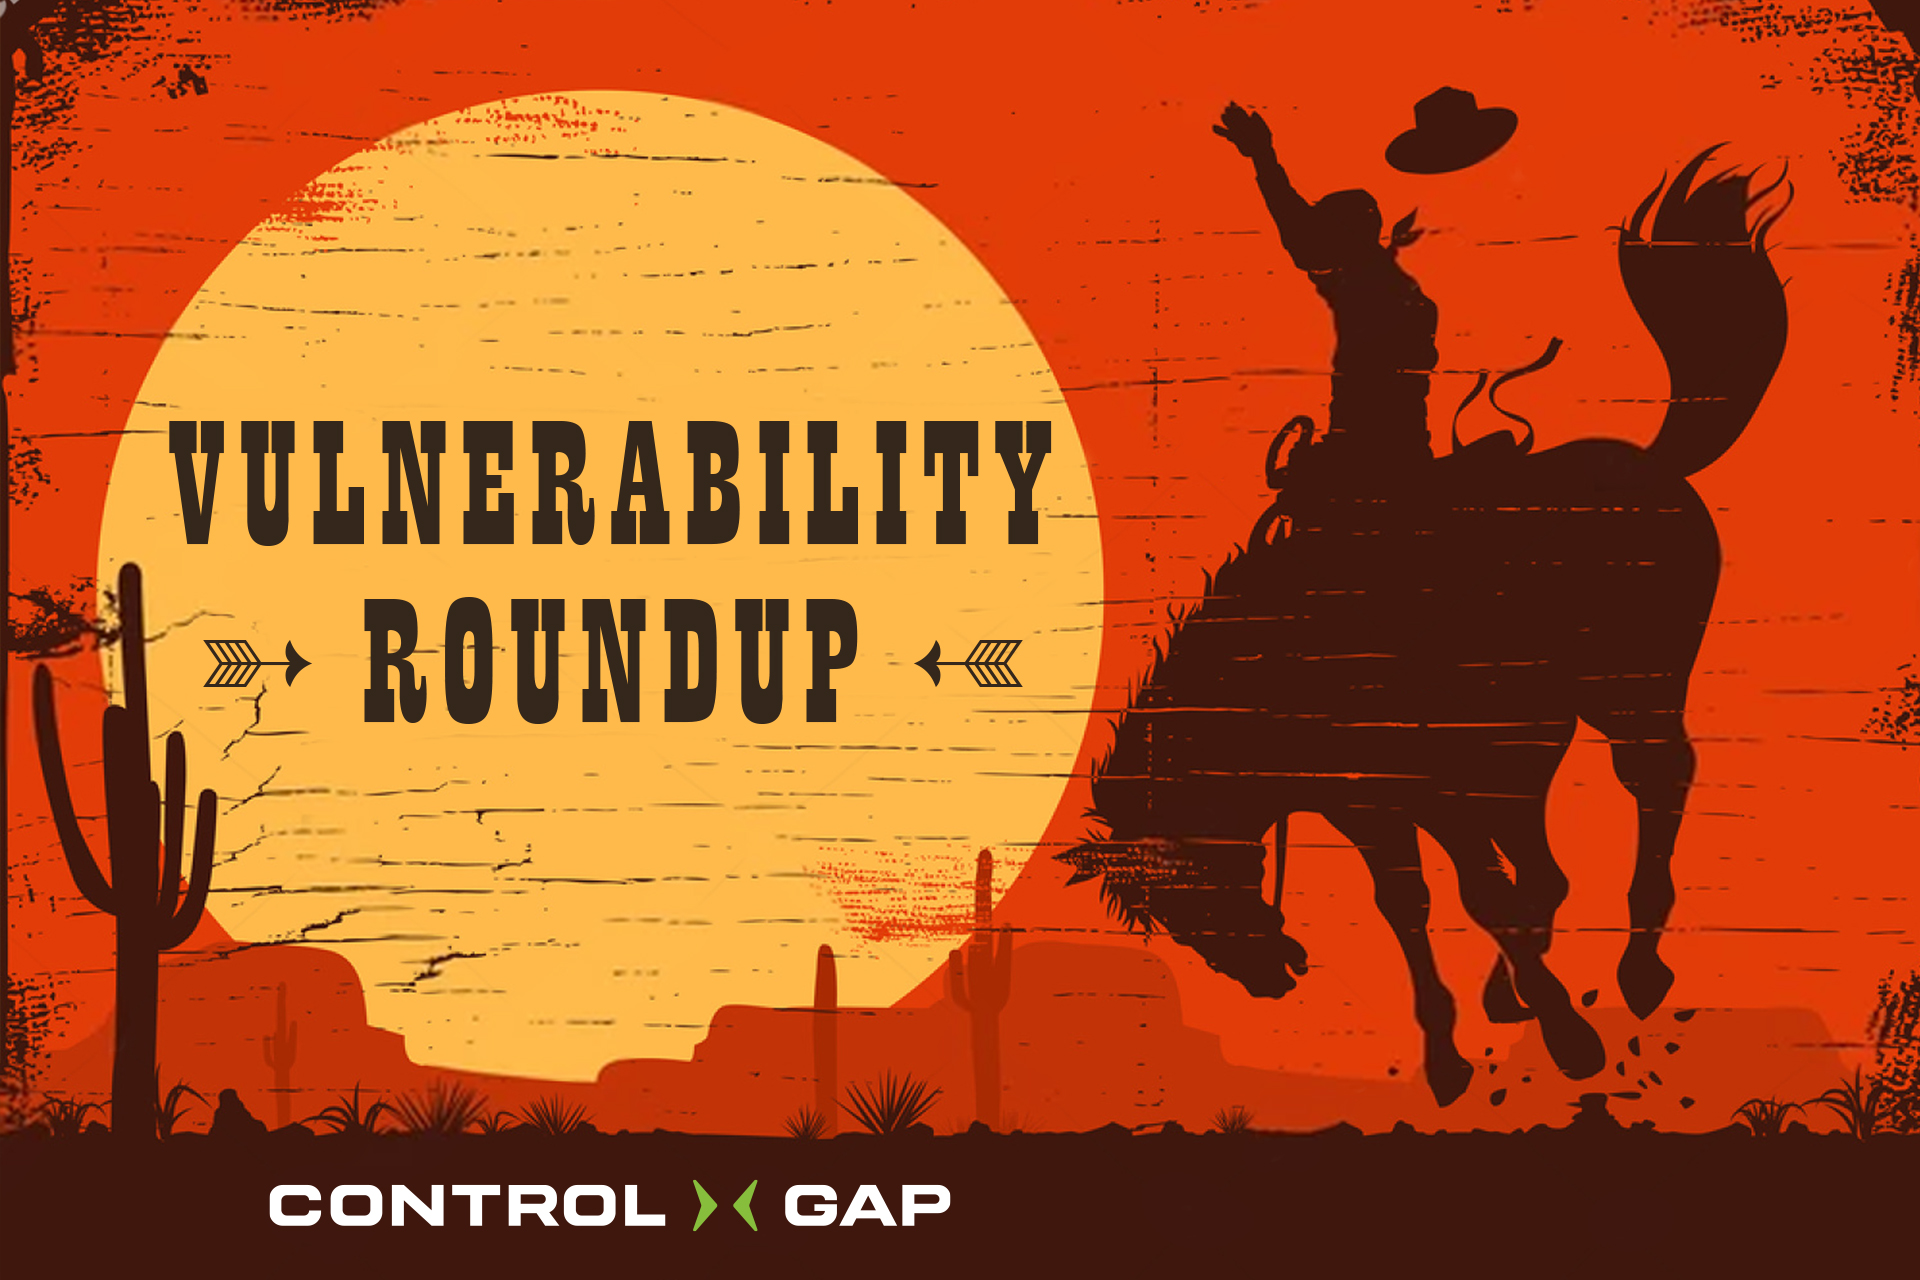 Control Gap Vulnerability Roundup: April 22nd to April 28th